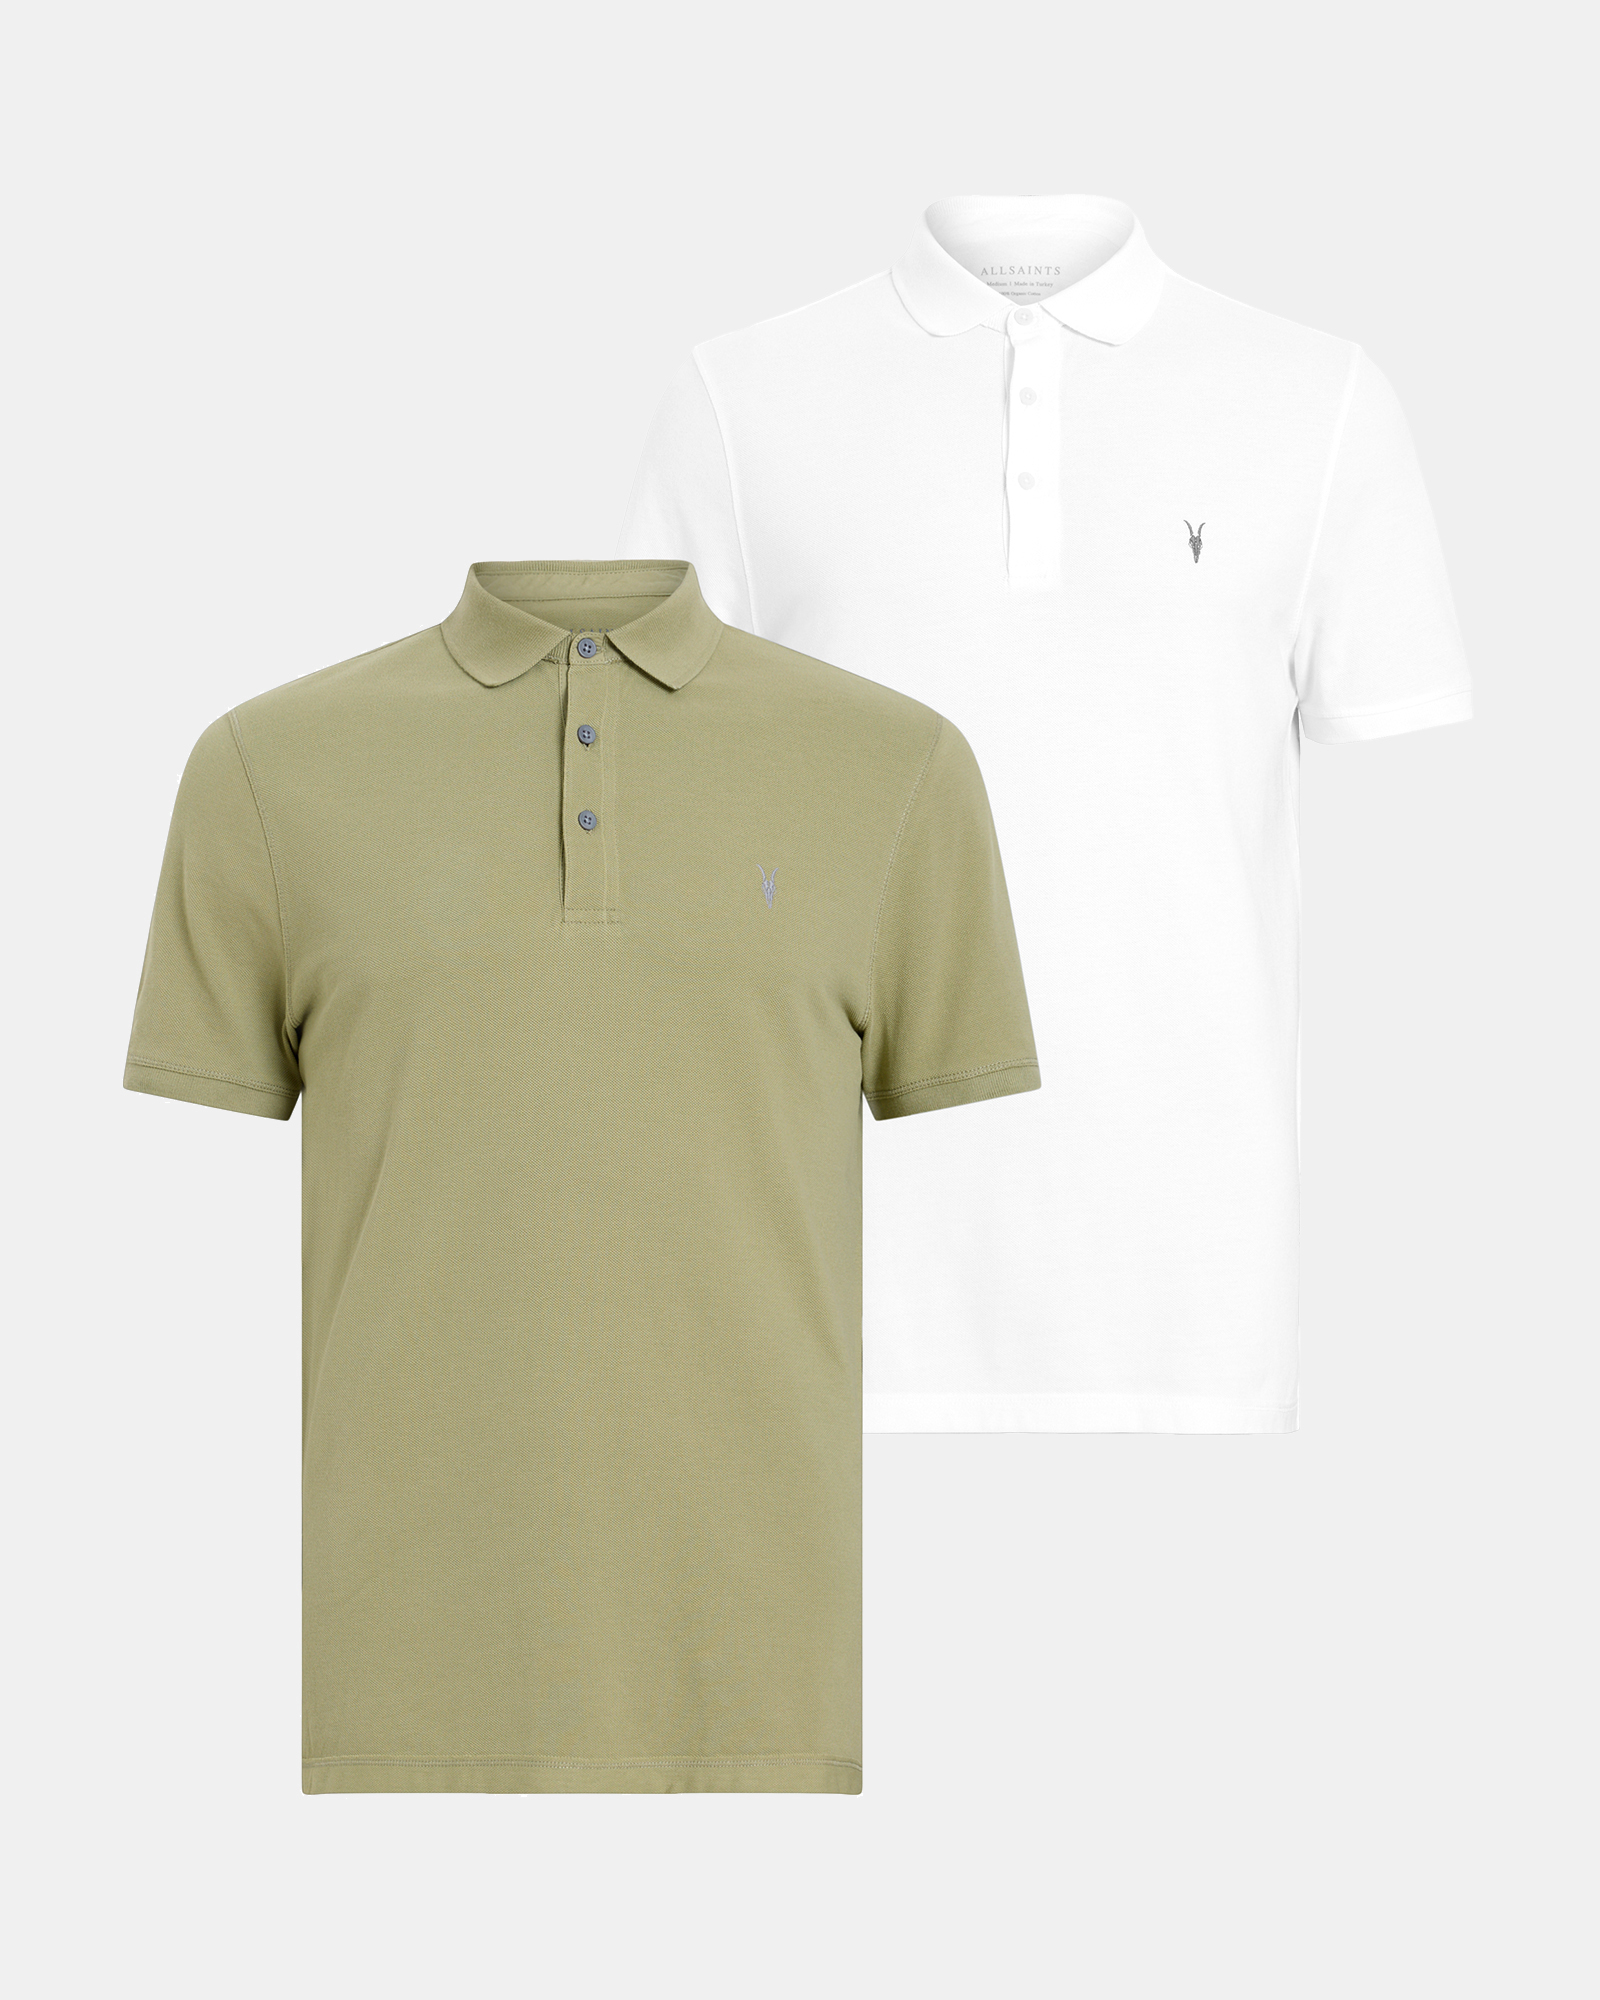 AllSaints Reform Short Sleeve Polo Shirts 2 Pack,, GREEN/OPT WHITE